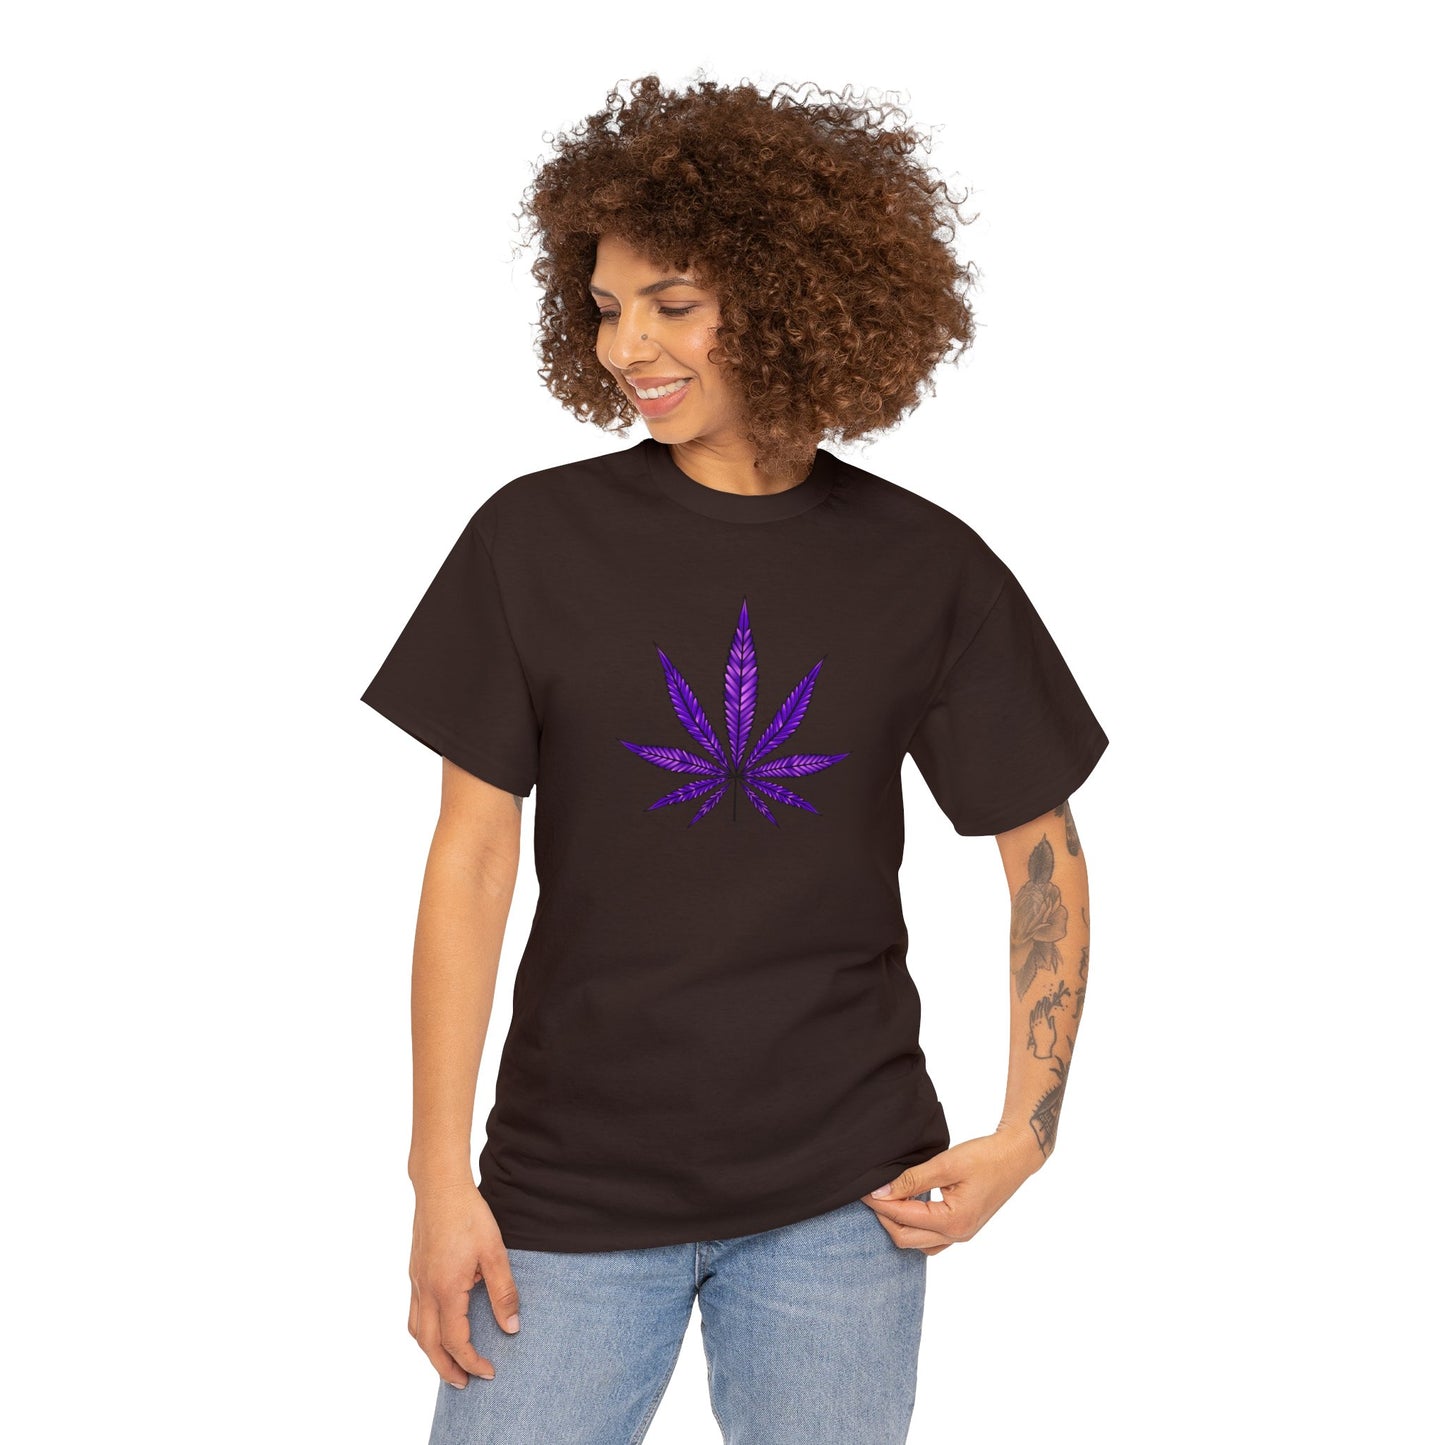 A woman in a Purple Cannabis Leaf Tee with a purple cannabis leaf design on the front.